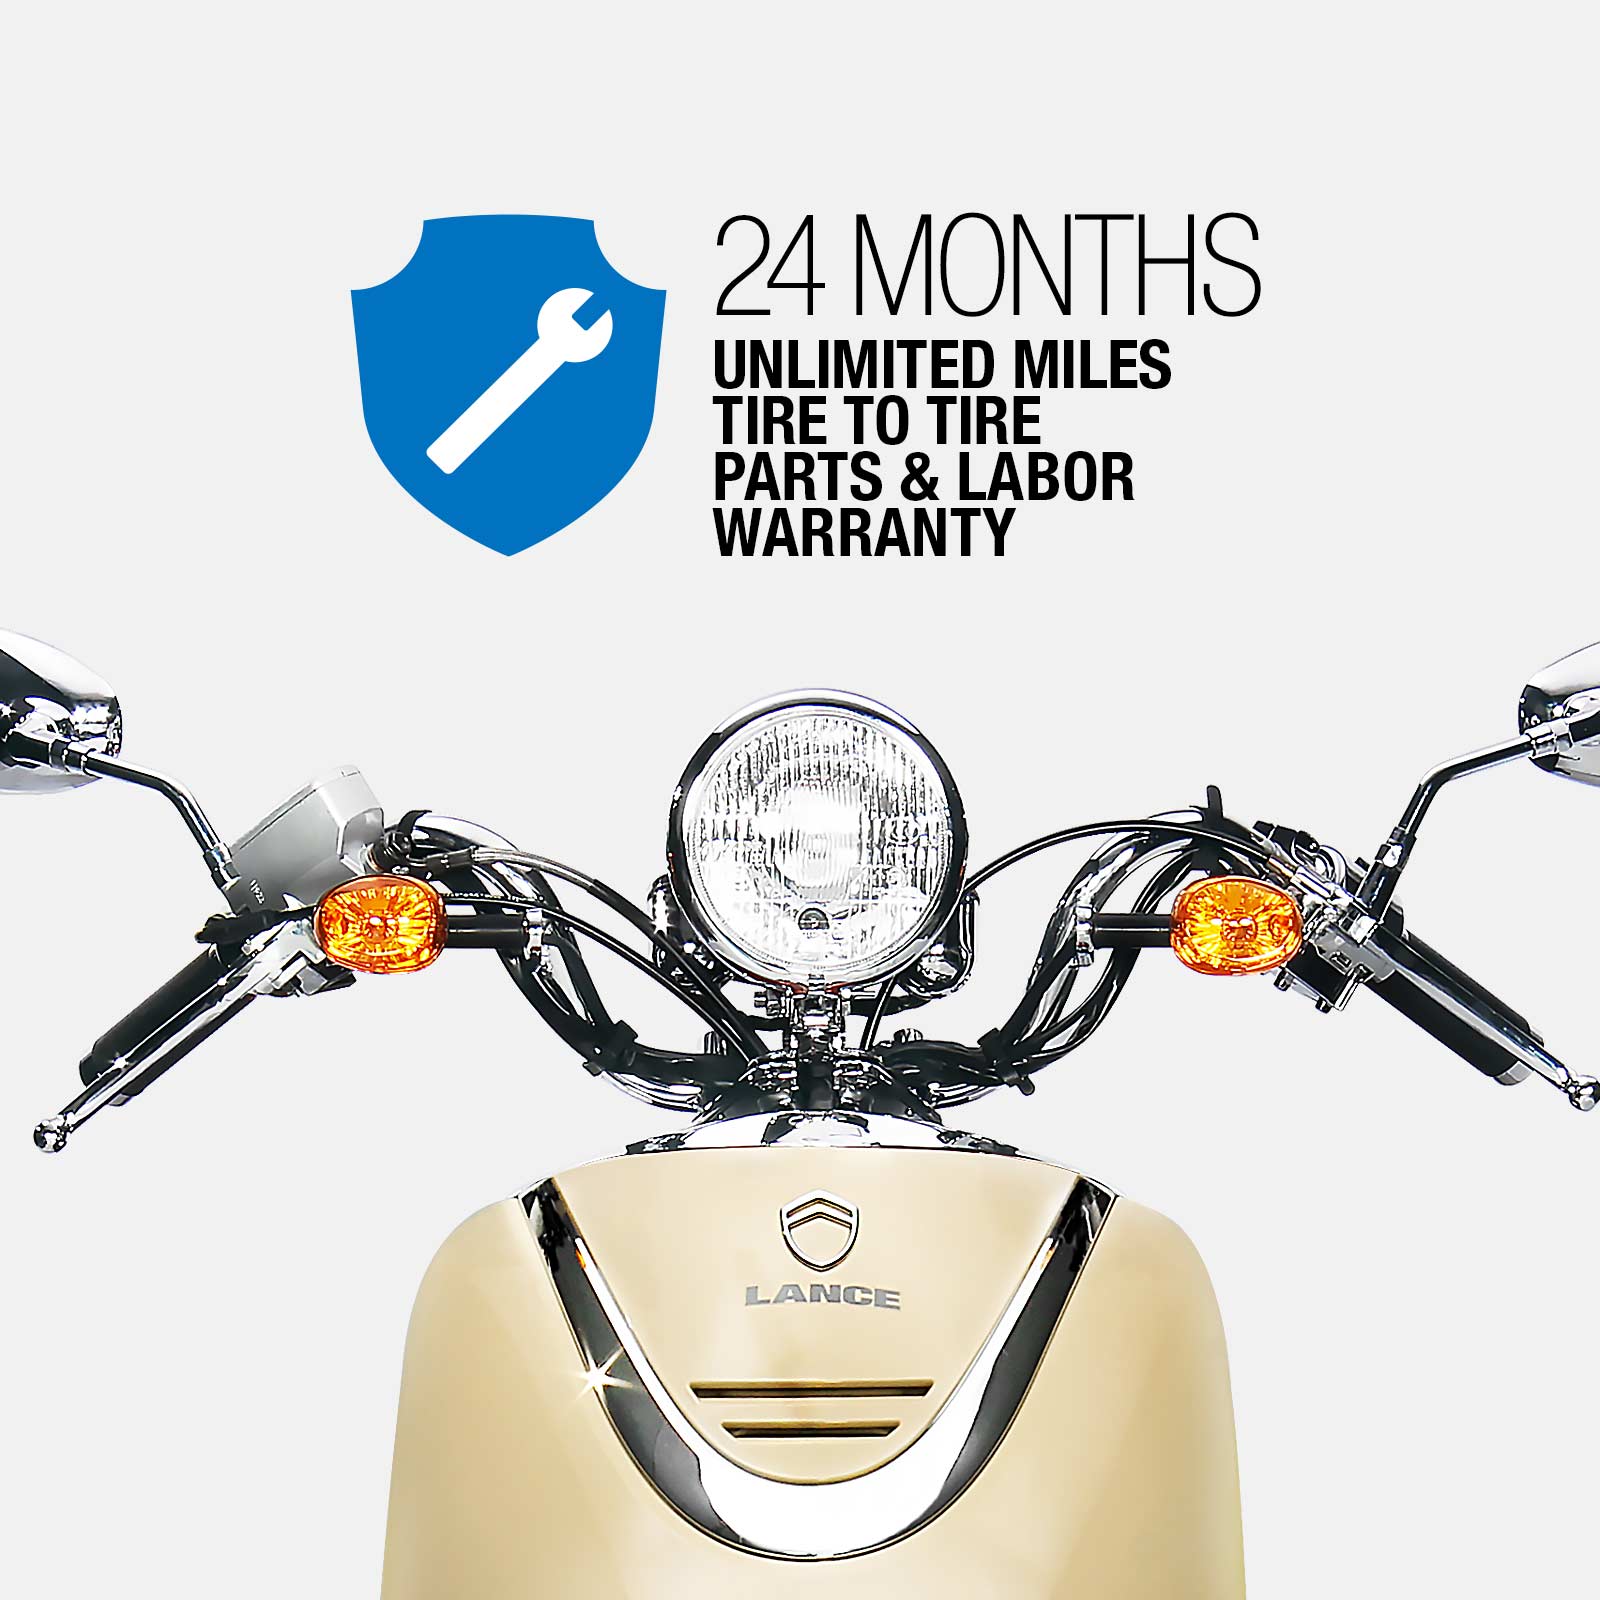 New Lance Warranty Increase to 24 Months, on All 2013 Models and Newer.